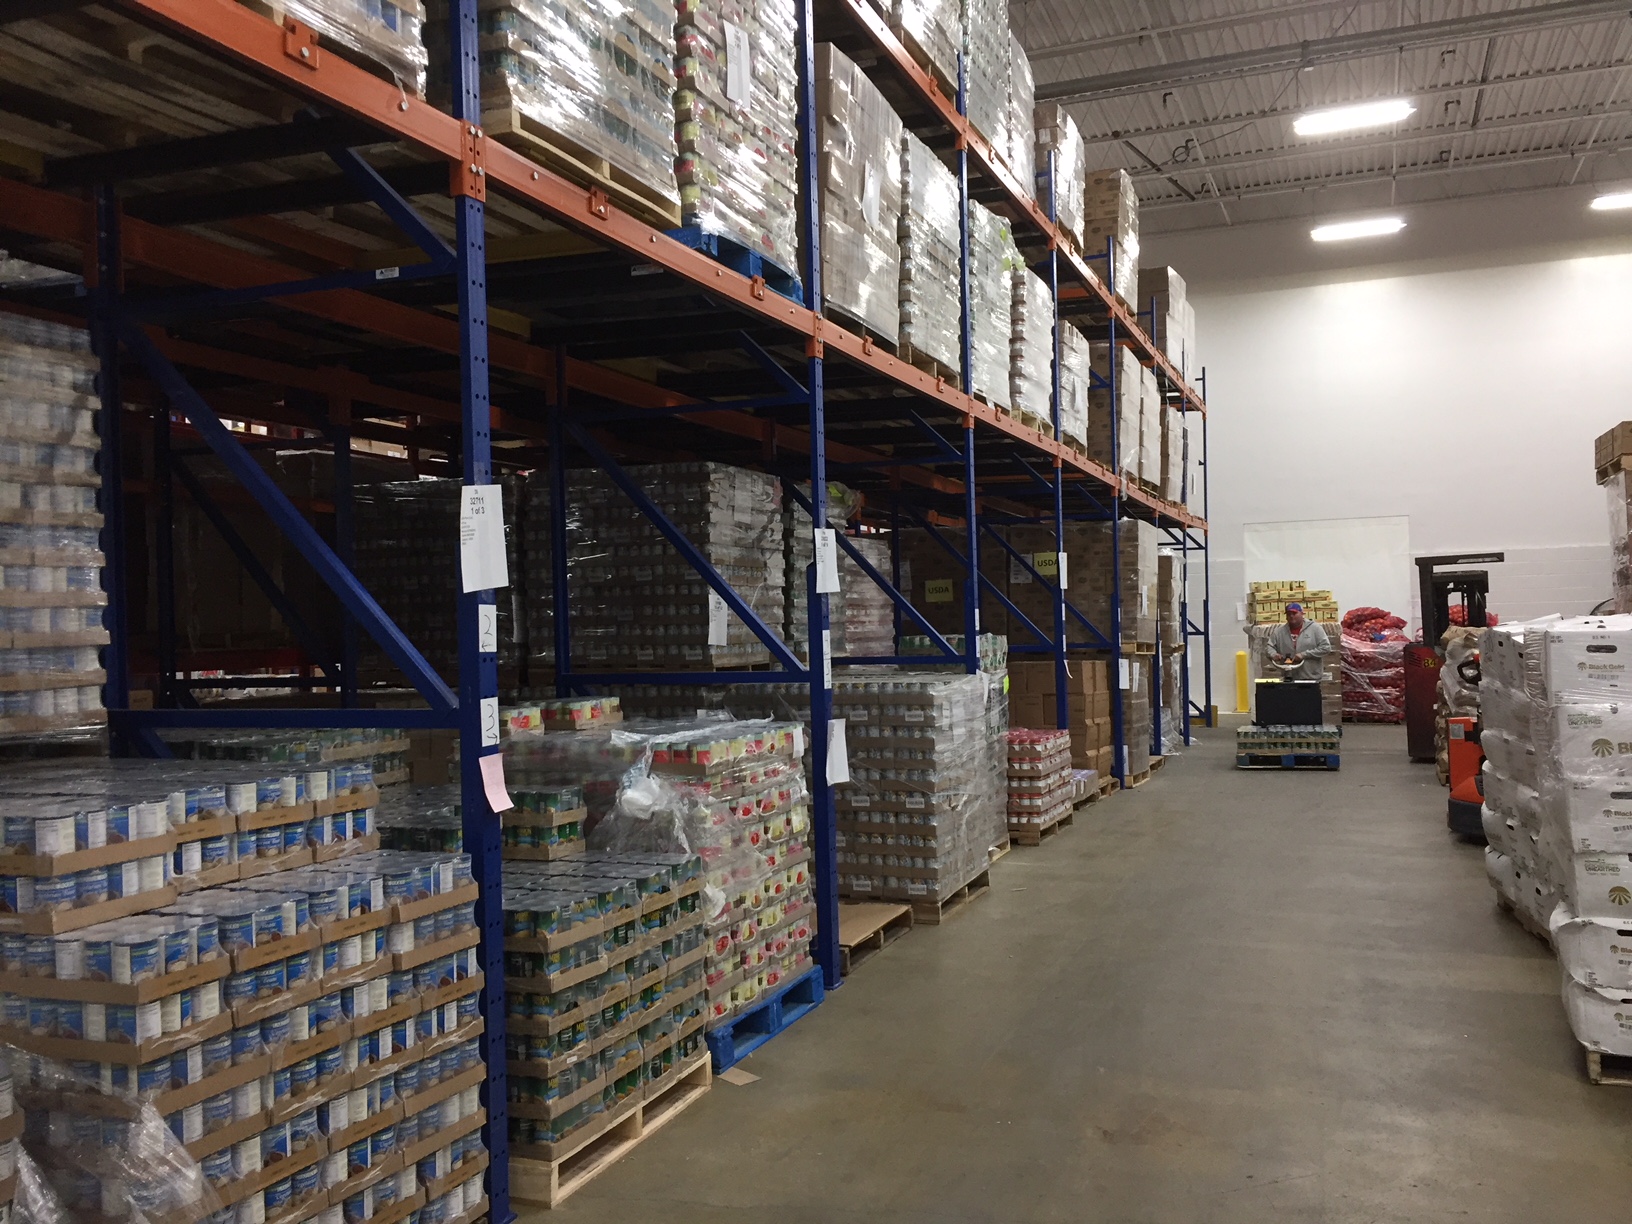 Tall racking with pallets of packaged food